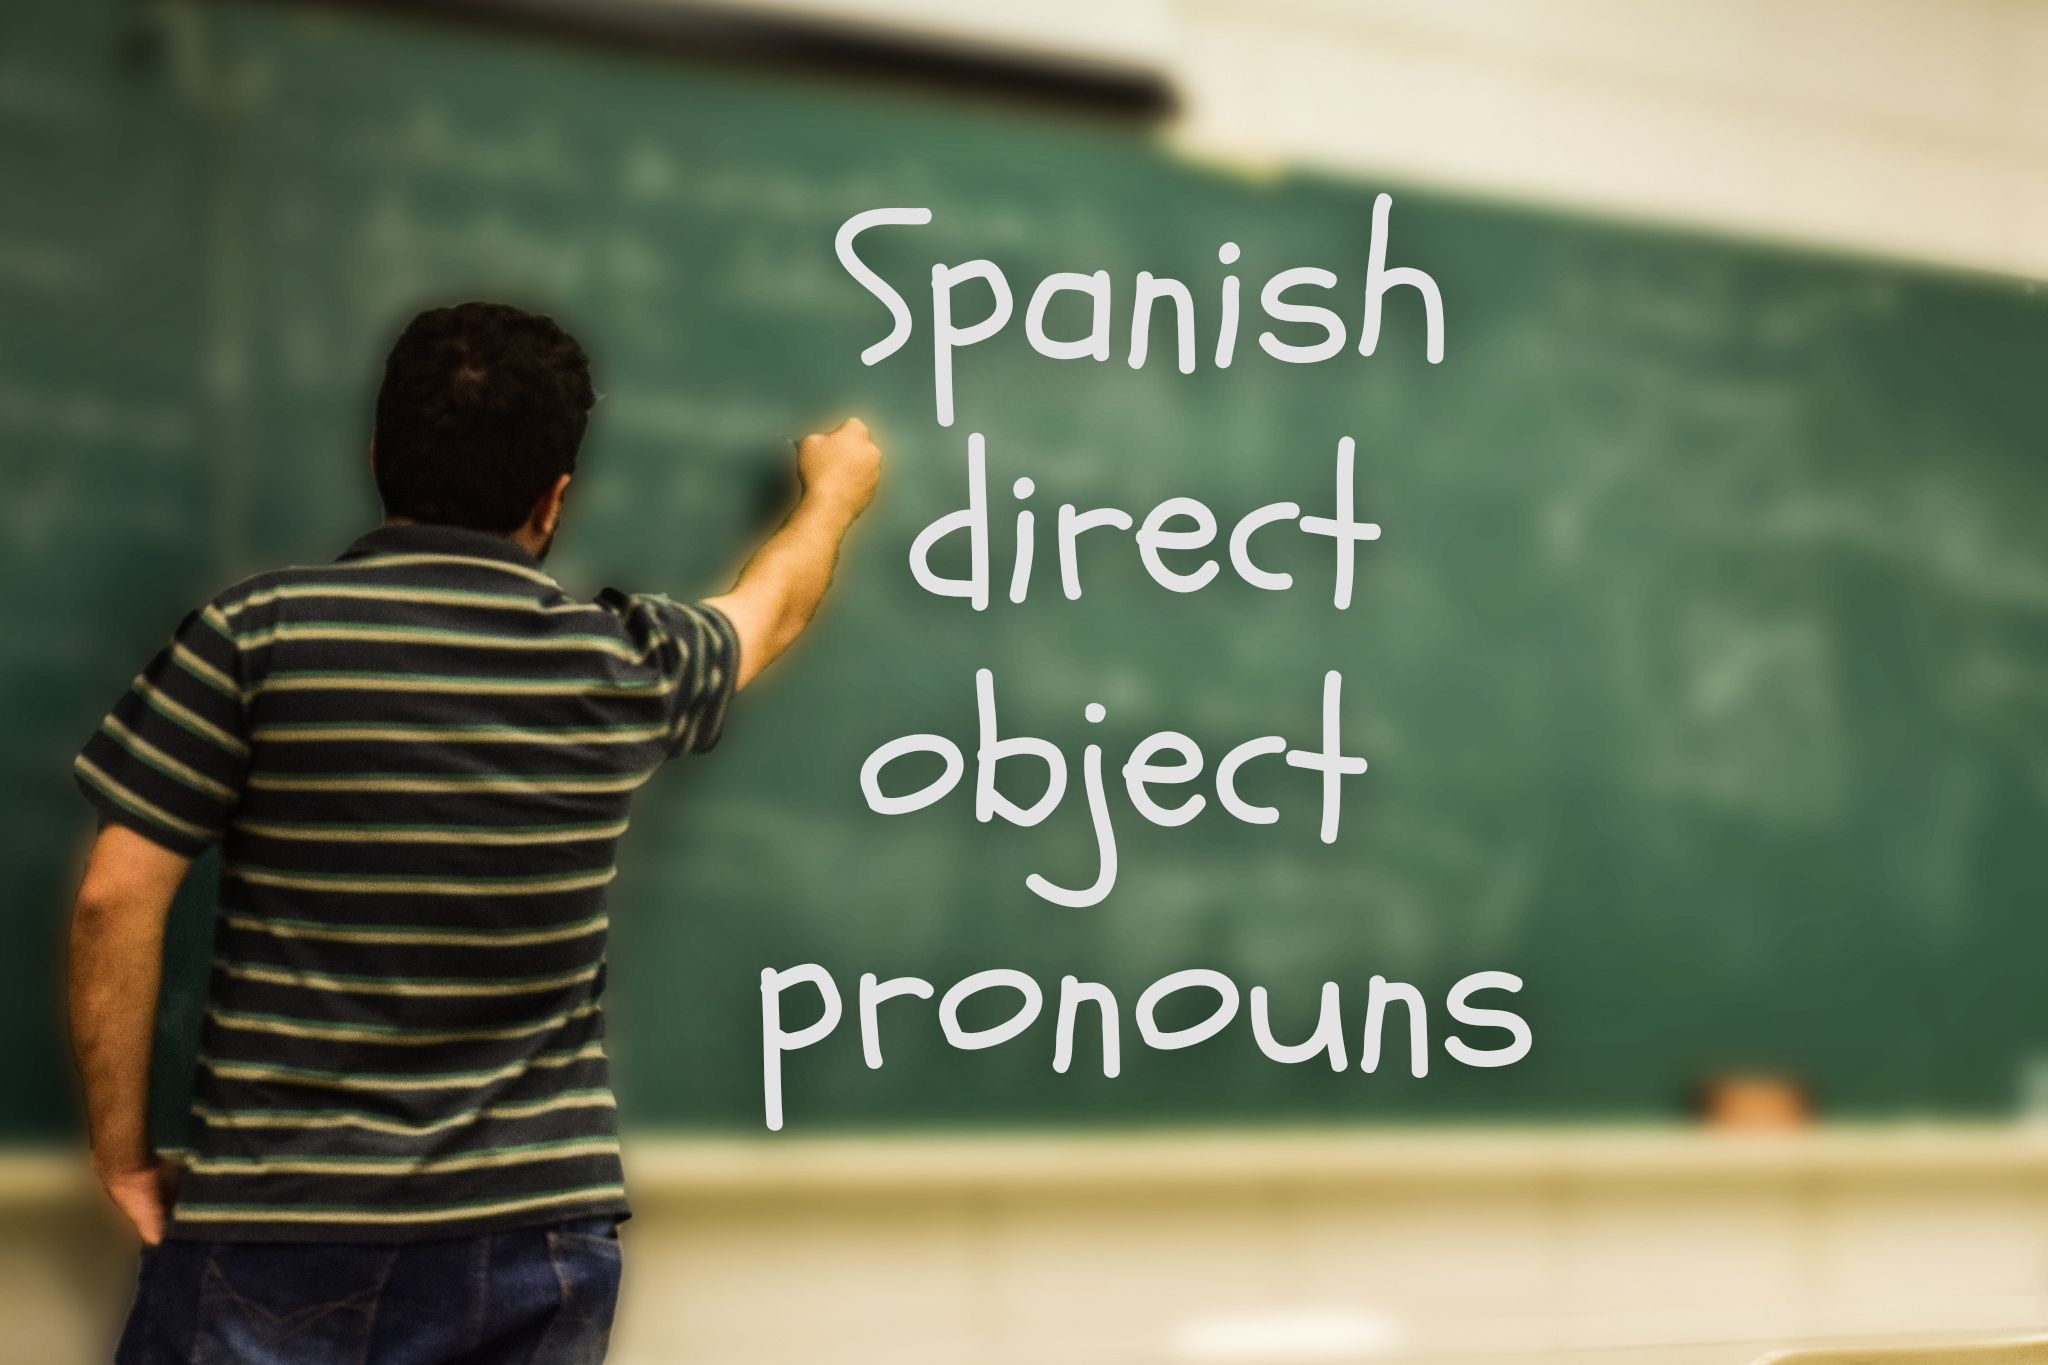 Let's learn Spanish direct object pronouns